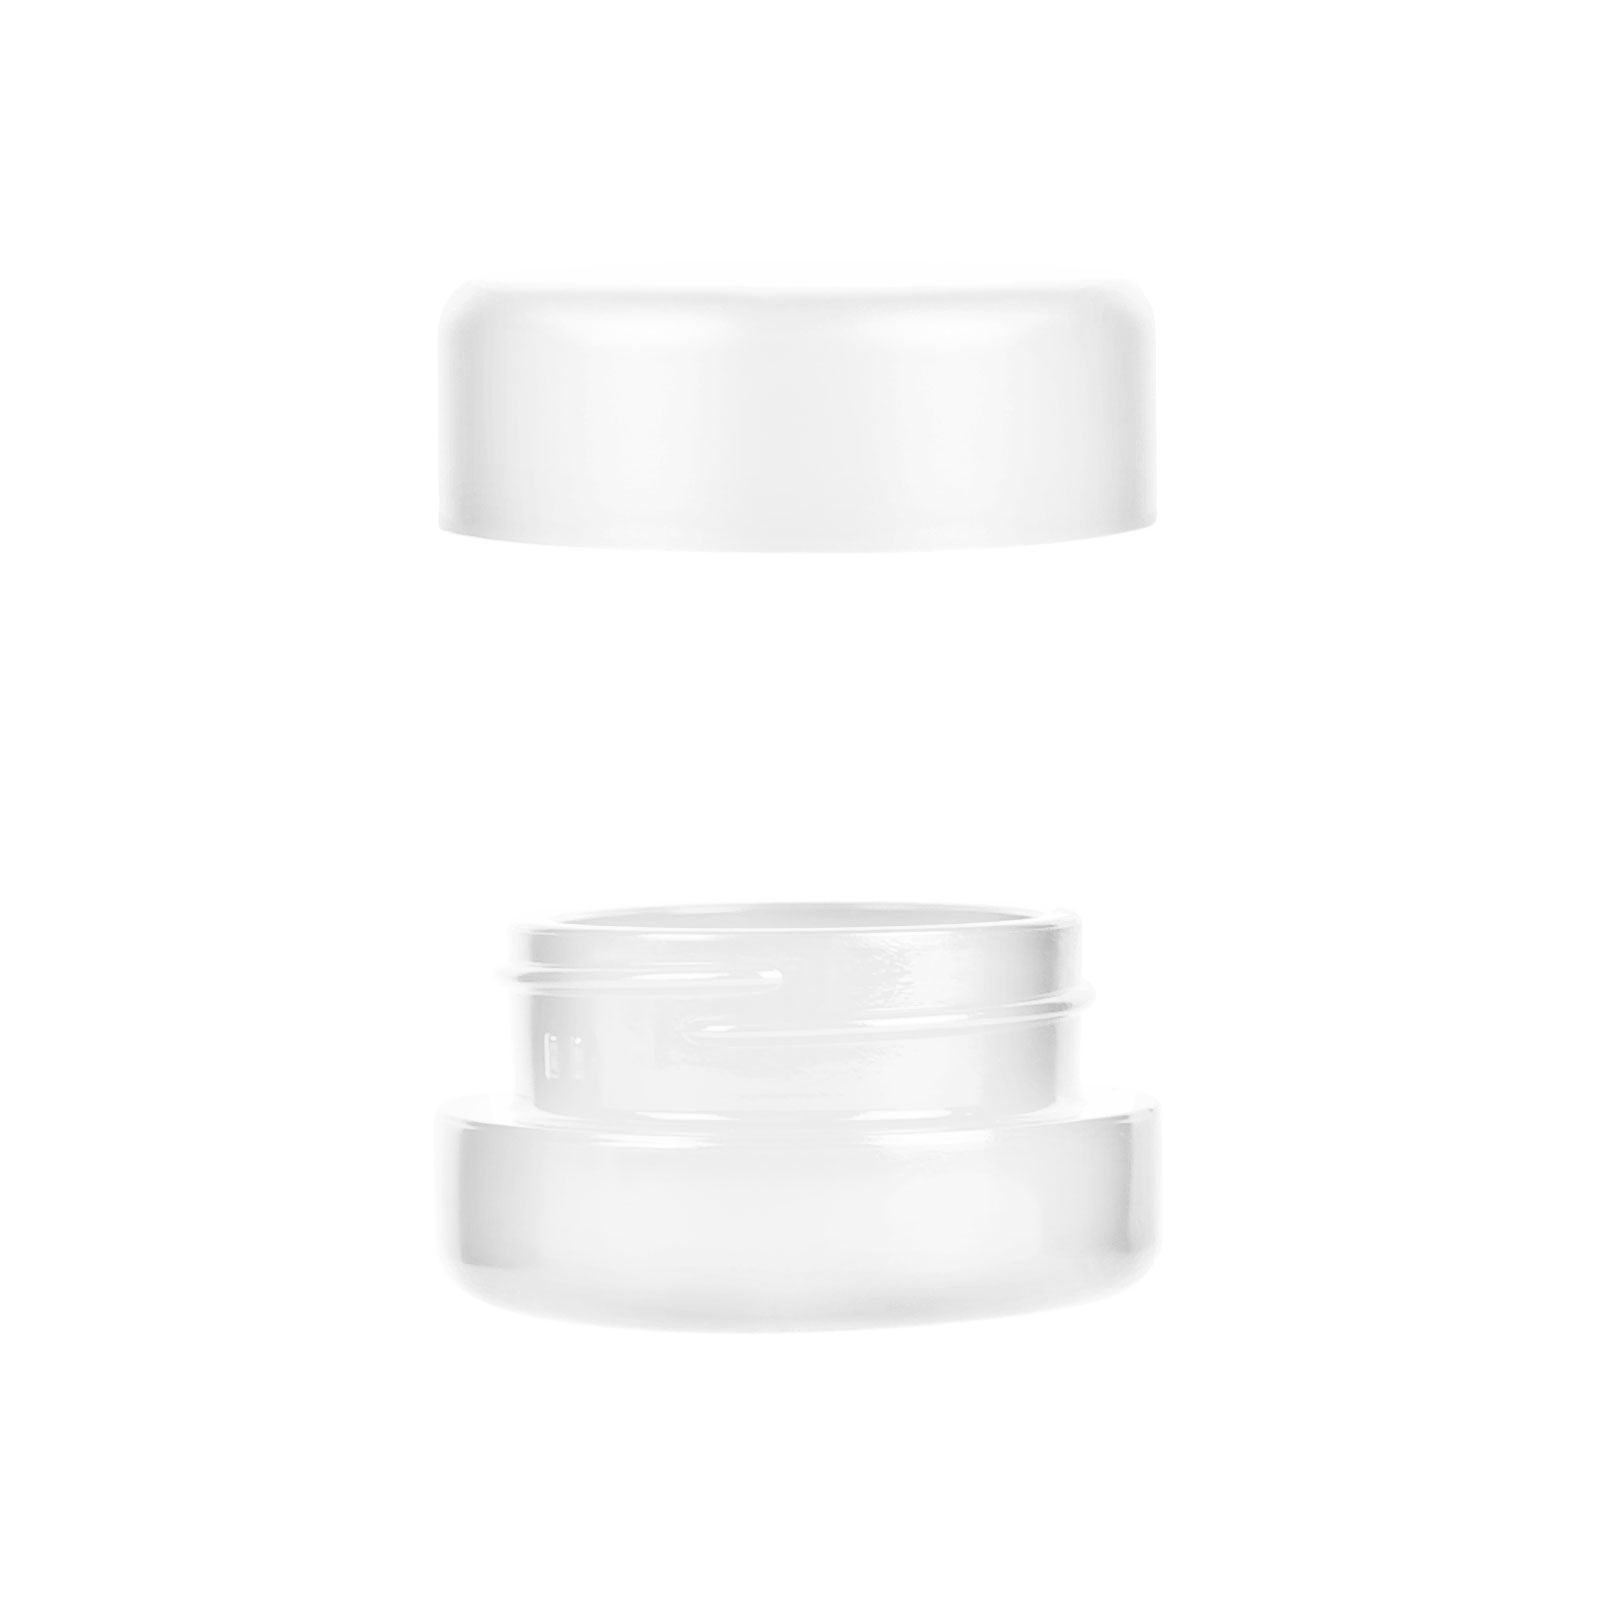 9ml Child Resistant White Glass Jar With White Cap - 2 Gram - 320 Count